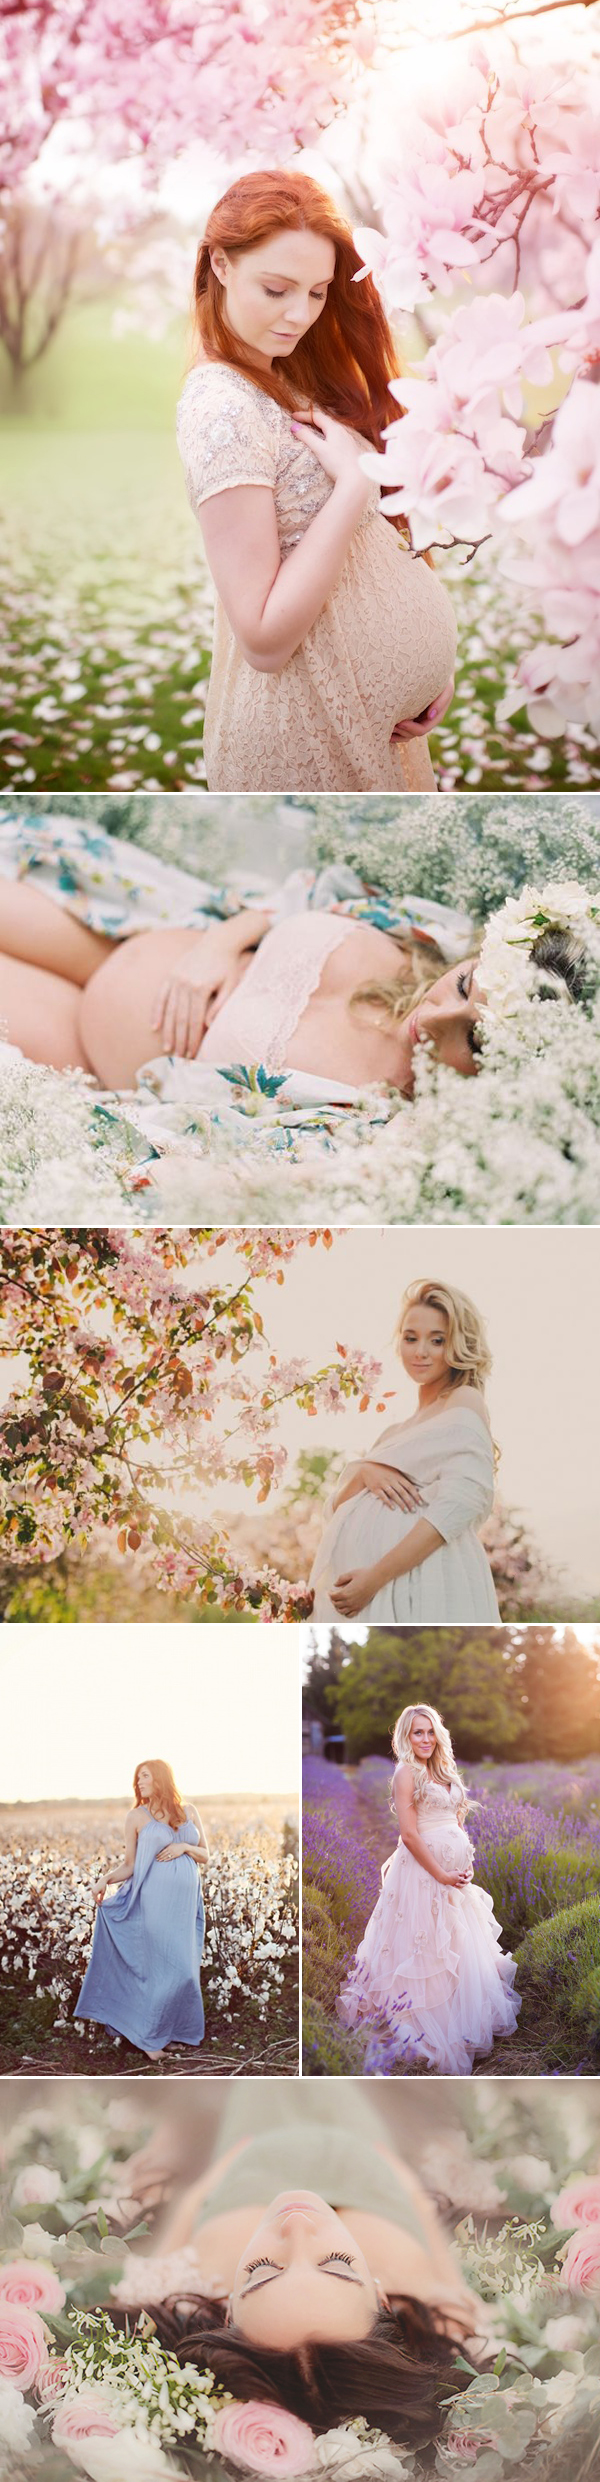 maternity01-floral